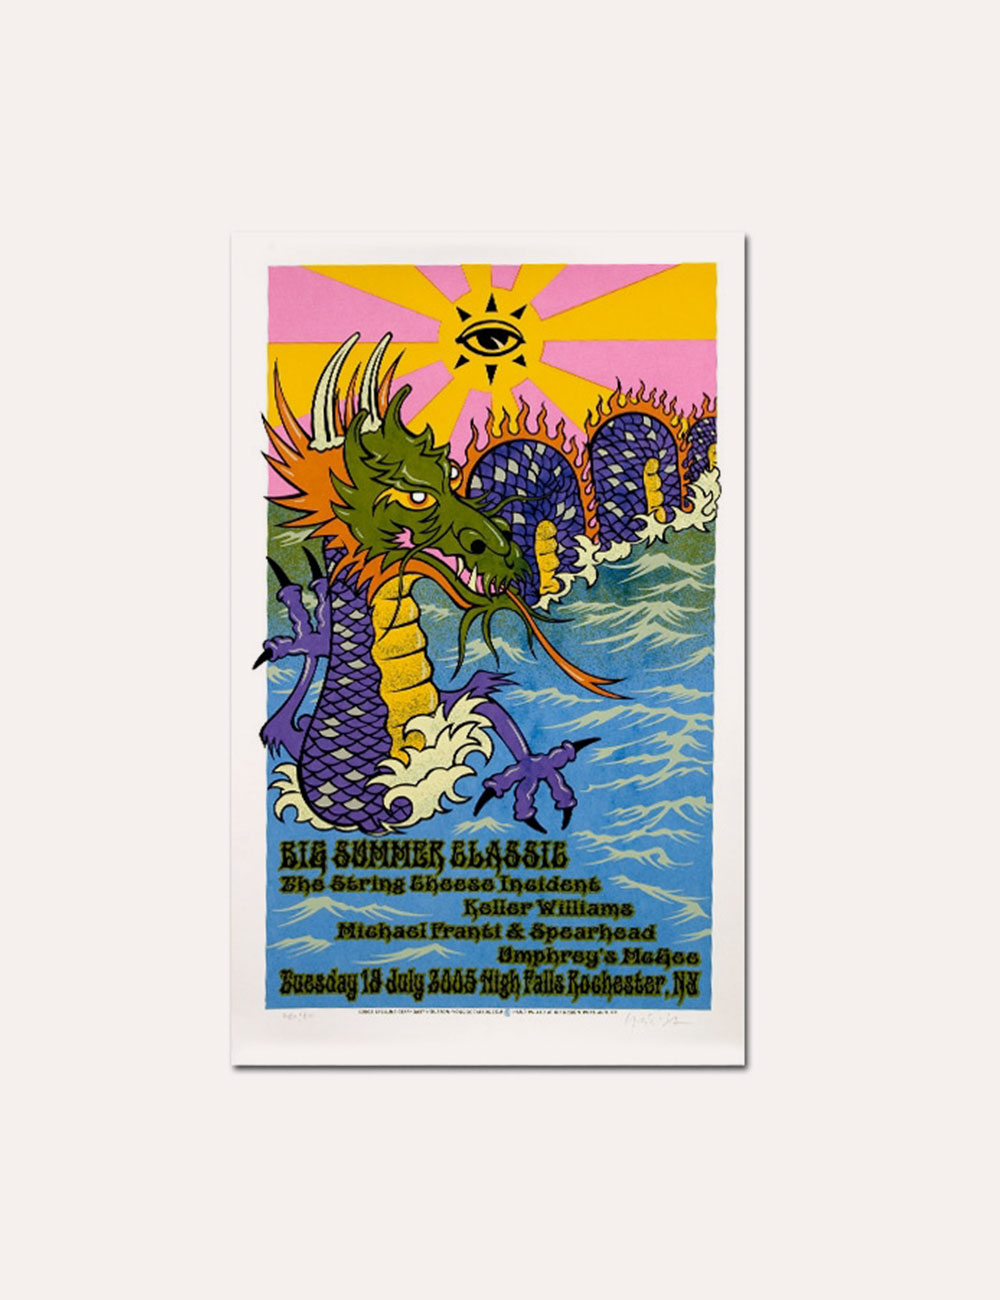 The String Cheese Incident - Merch - Poster - 2005 BIG Serpent Rochester HOUSTON Poster